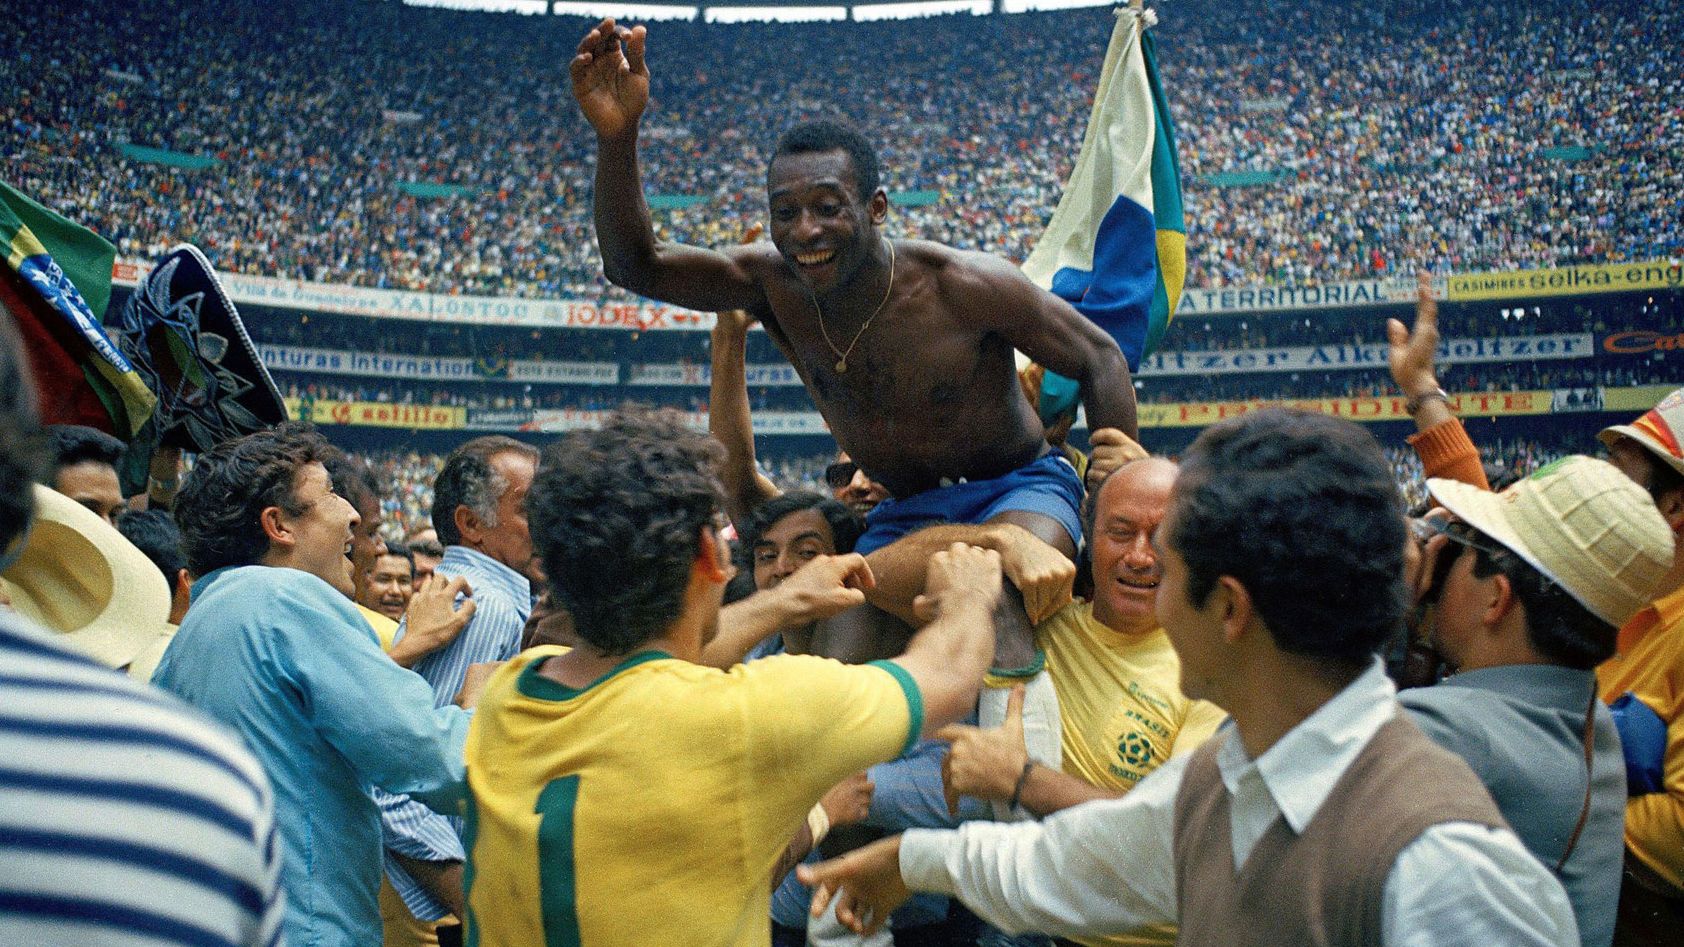 Pelé is carried off the field by fans after Brazil defeated Italy in the final of the 1970 World Cup.